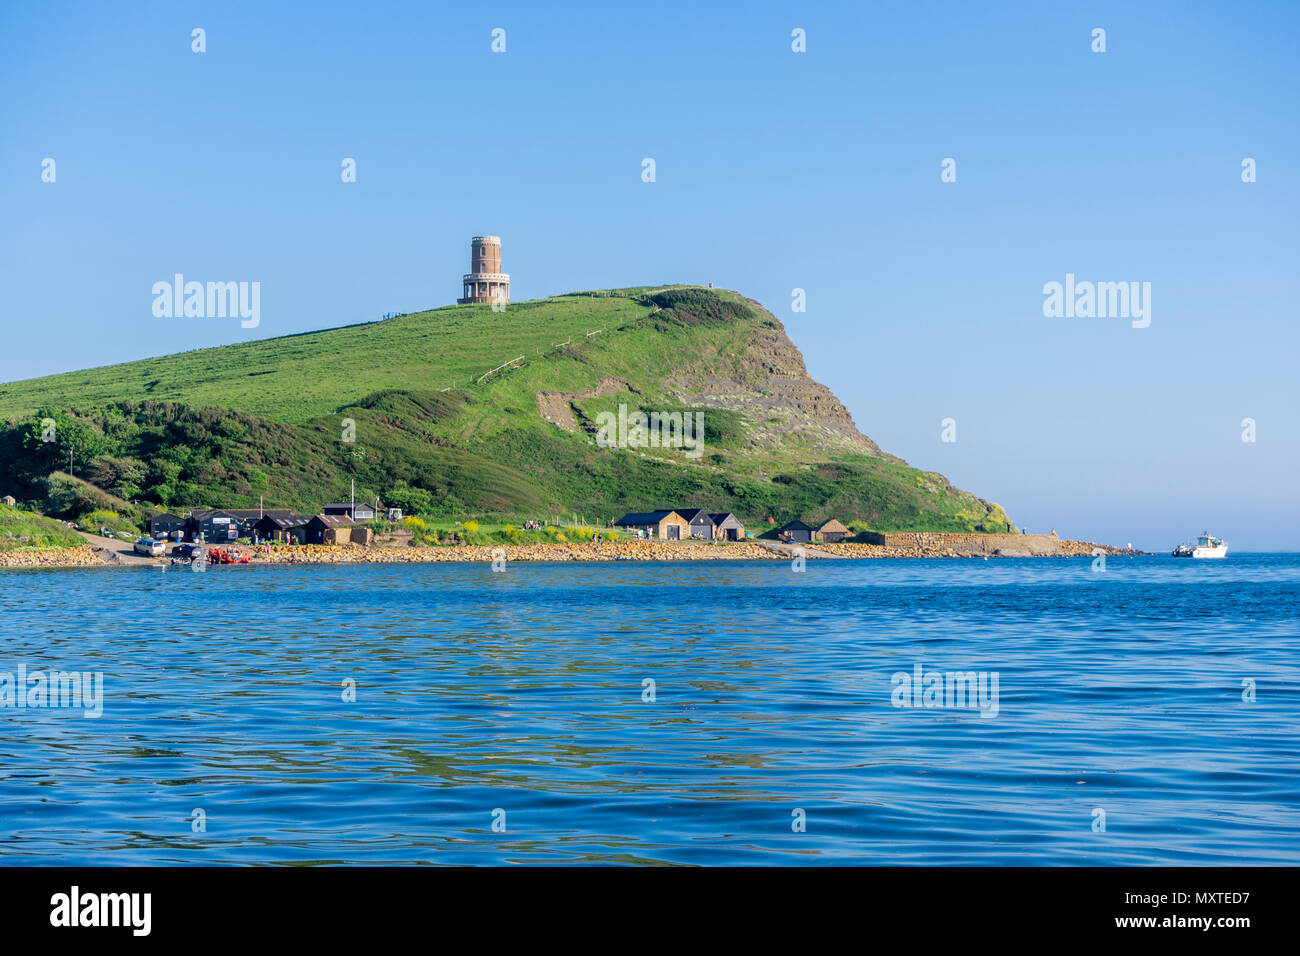 View over Kimmeridge Bay Jurassic Coast World Heritage site to Hen cliff with Clavell Tower on top, Dorset, England, UK Stock Photo